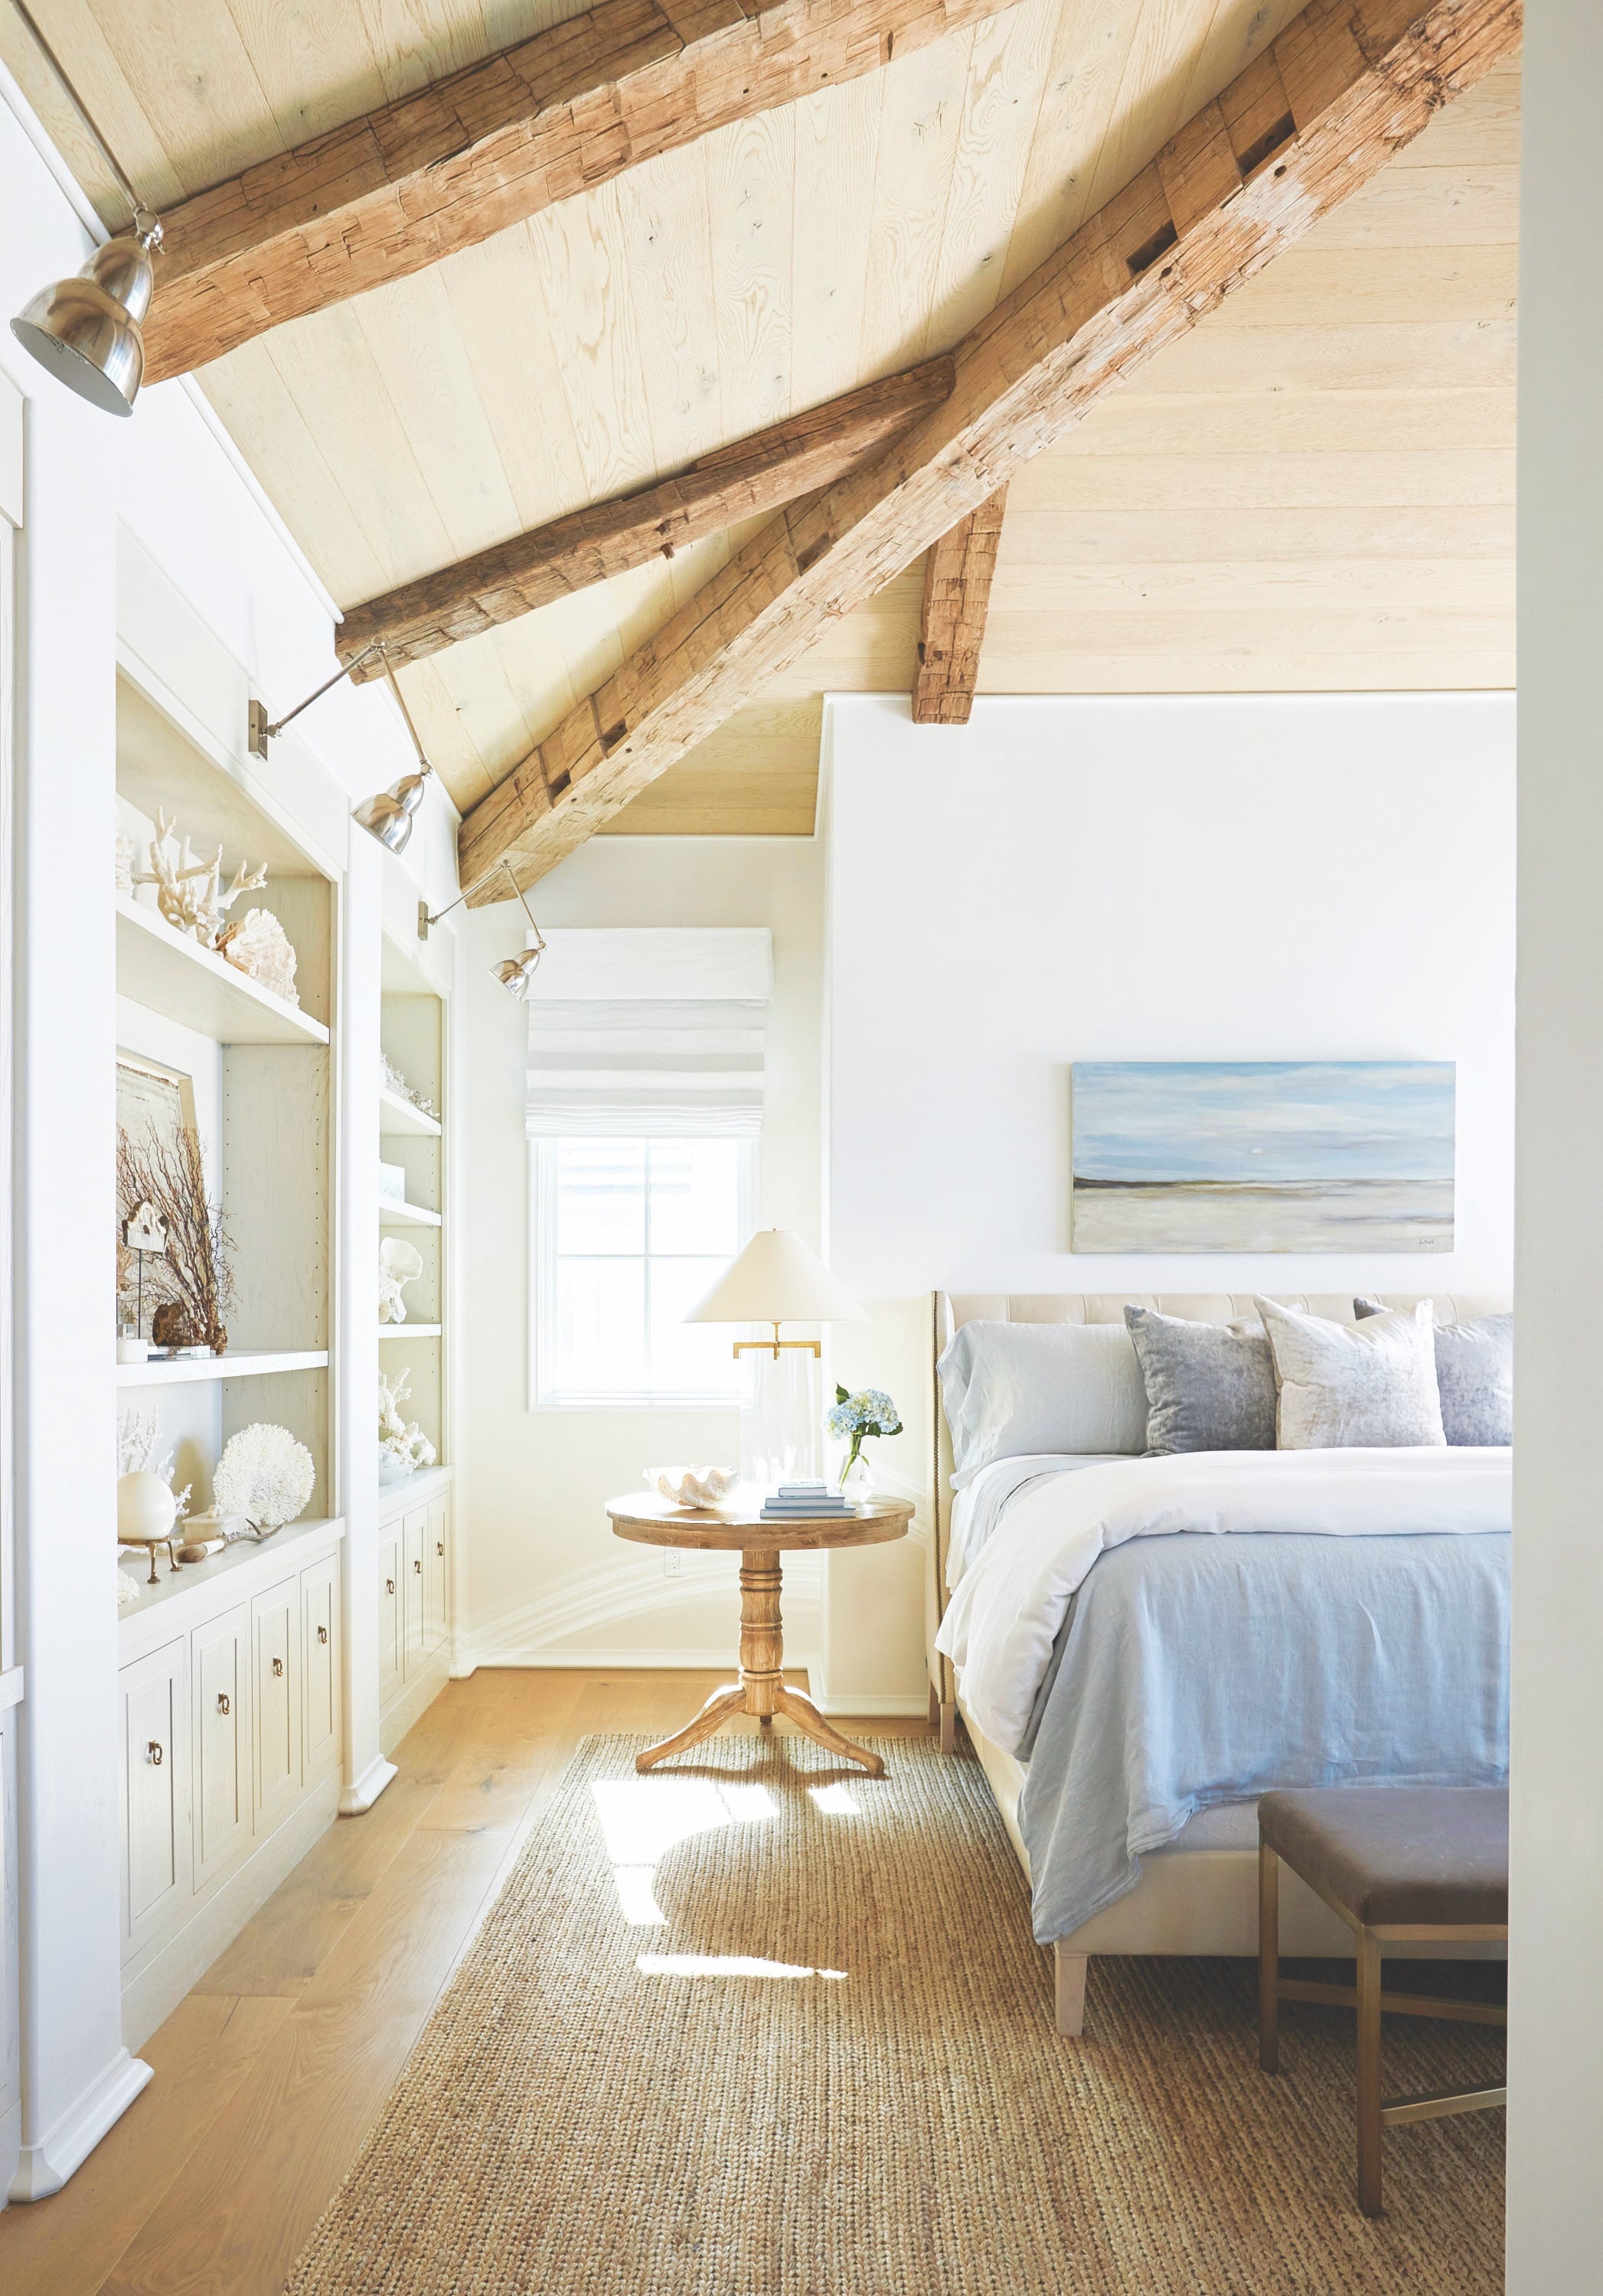 A serene bedroom oasis in The Retreat neighborhood of Blue Mountain Beach, Florida, designed by Holly Shipman